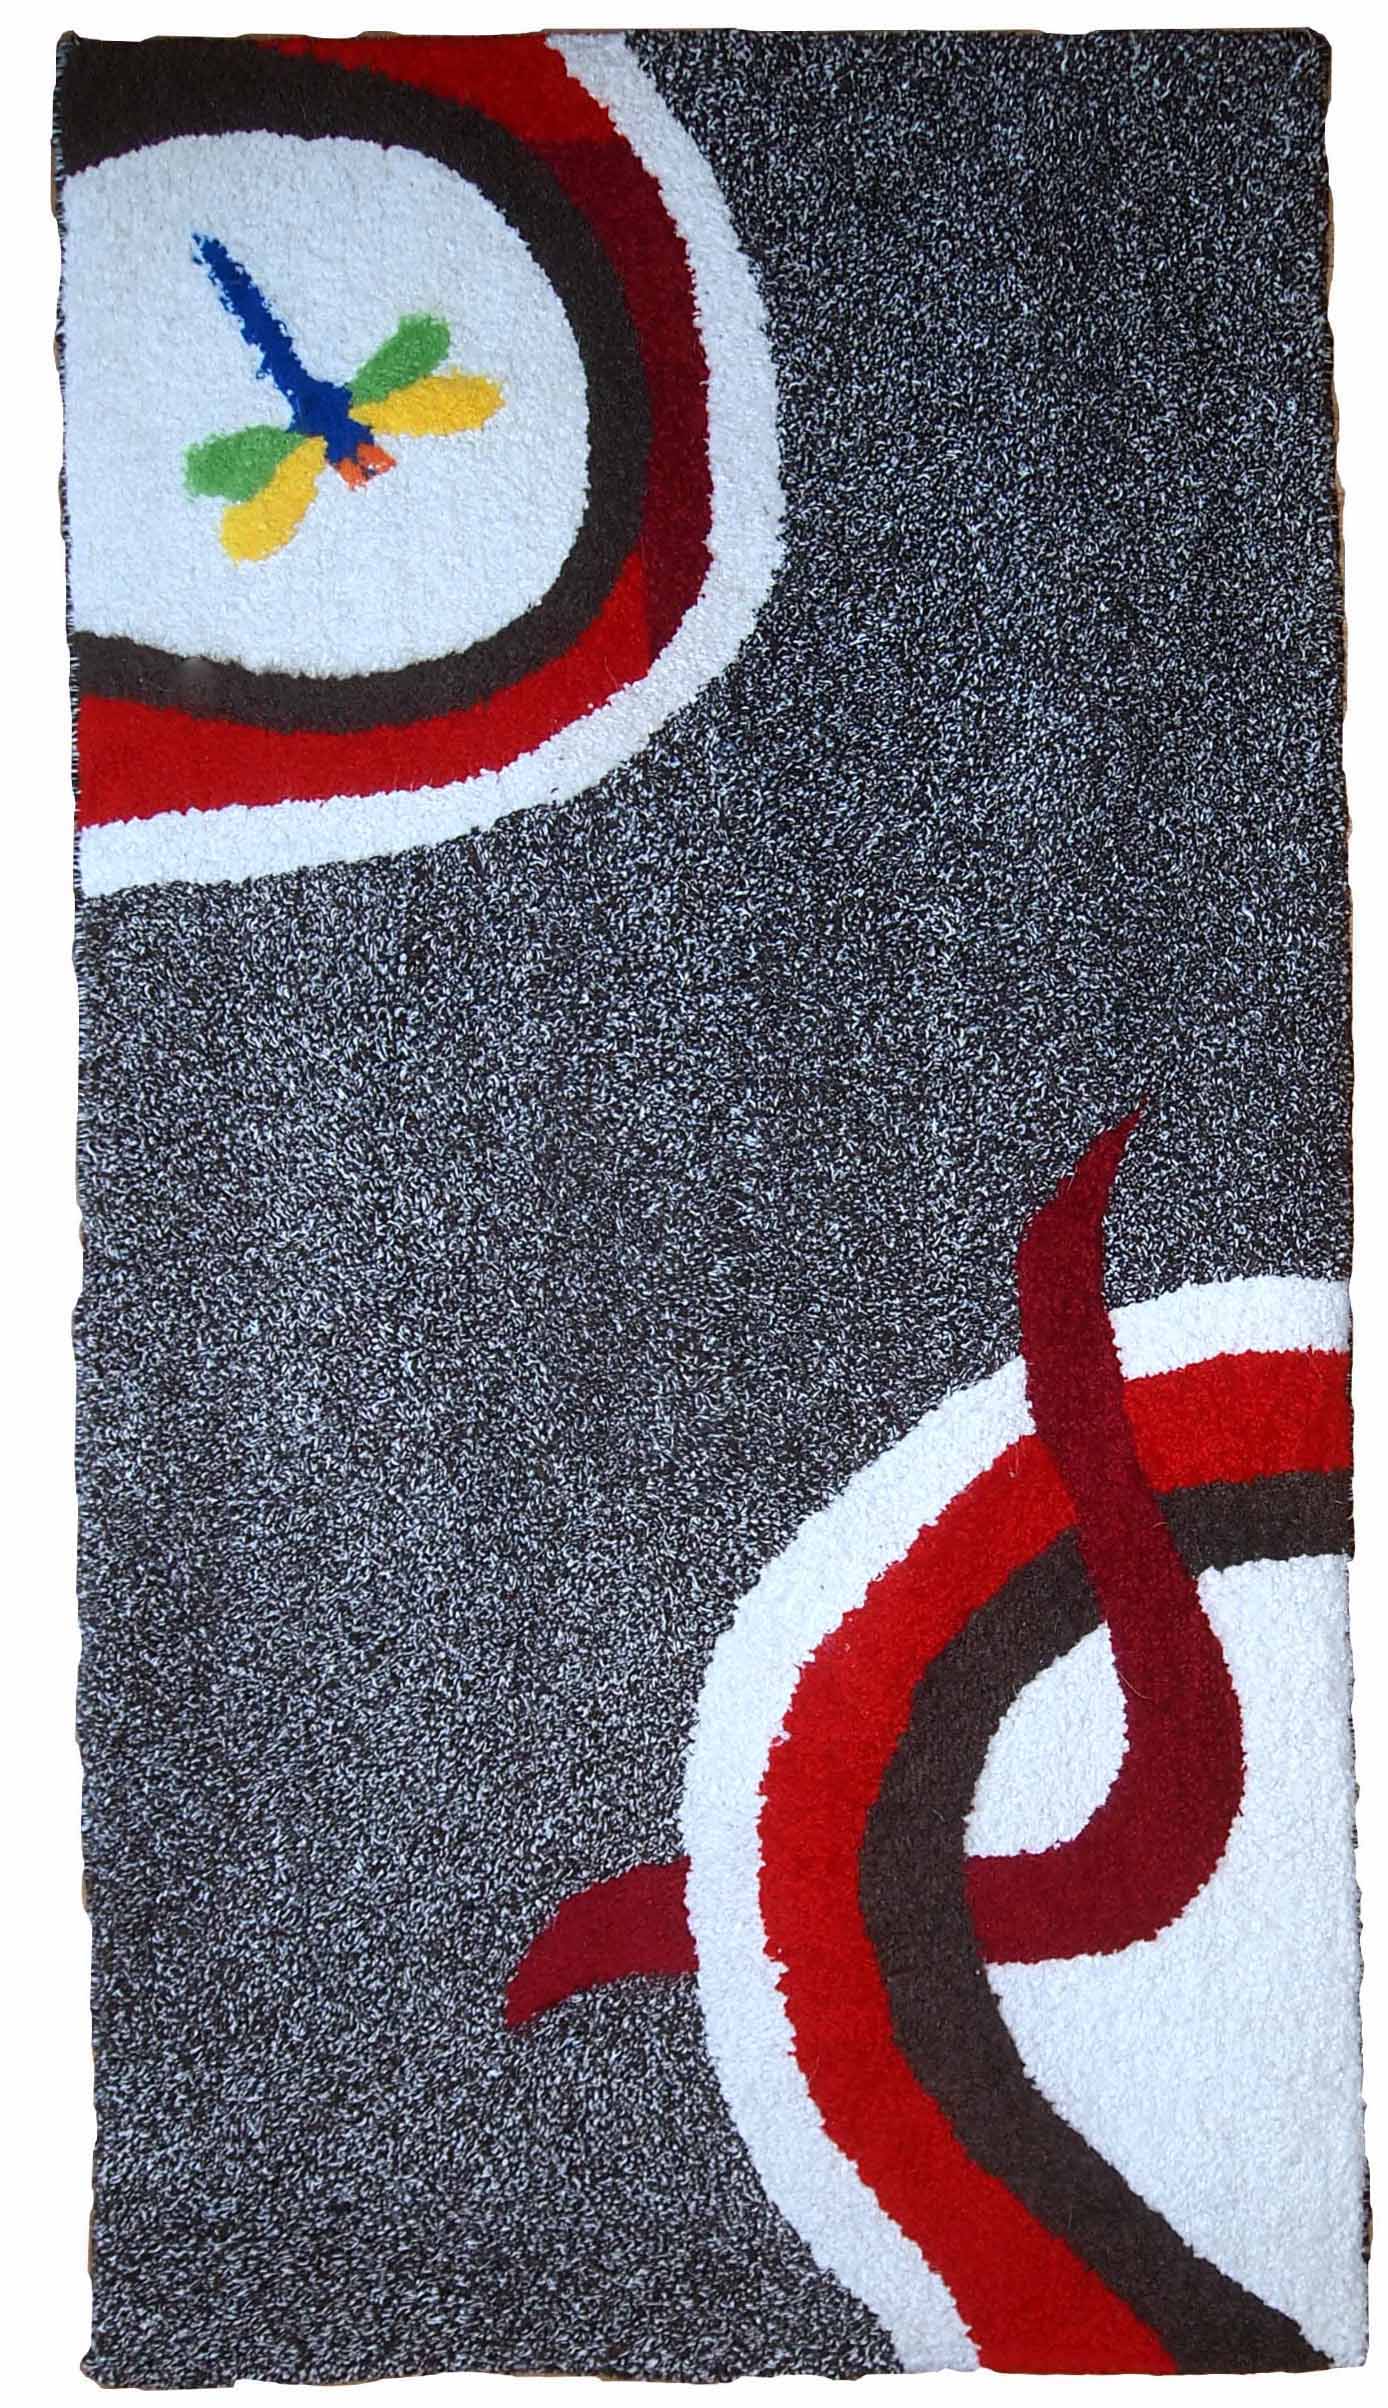 Handmade contemporary ORA French hooked rug 2021